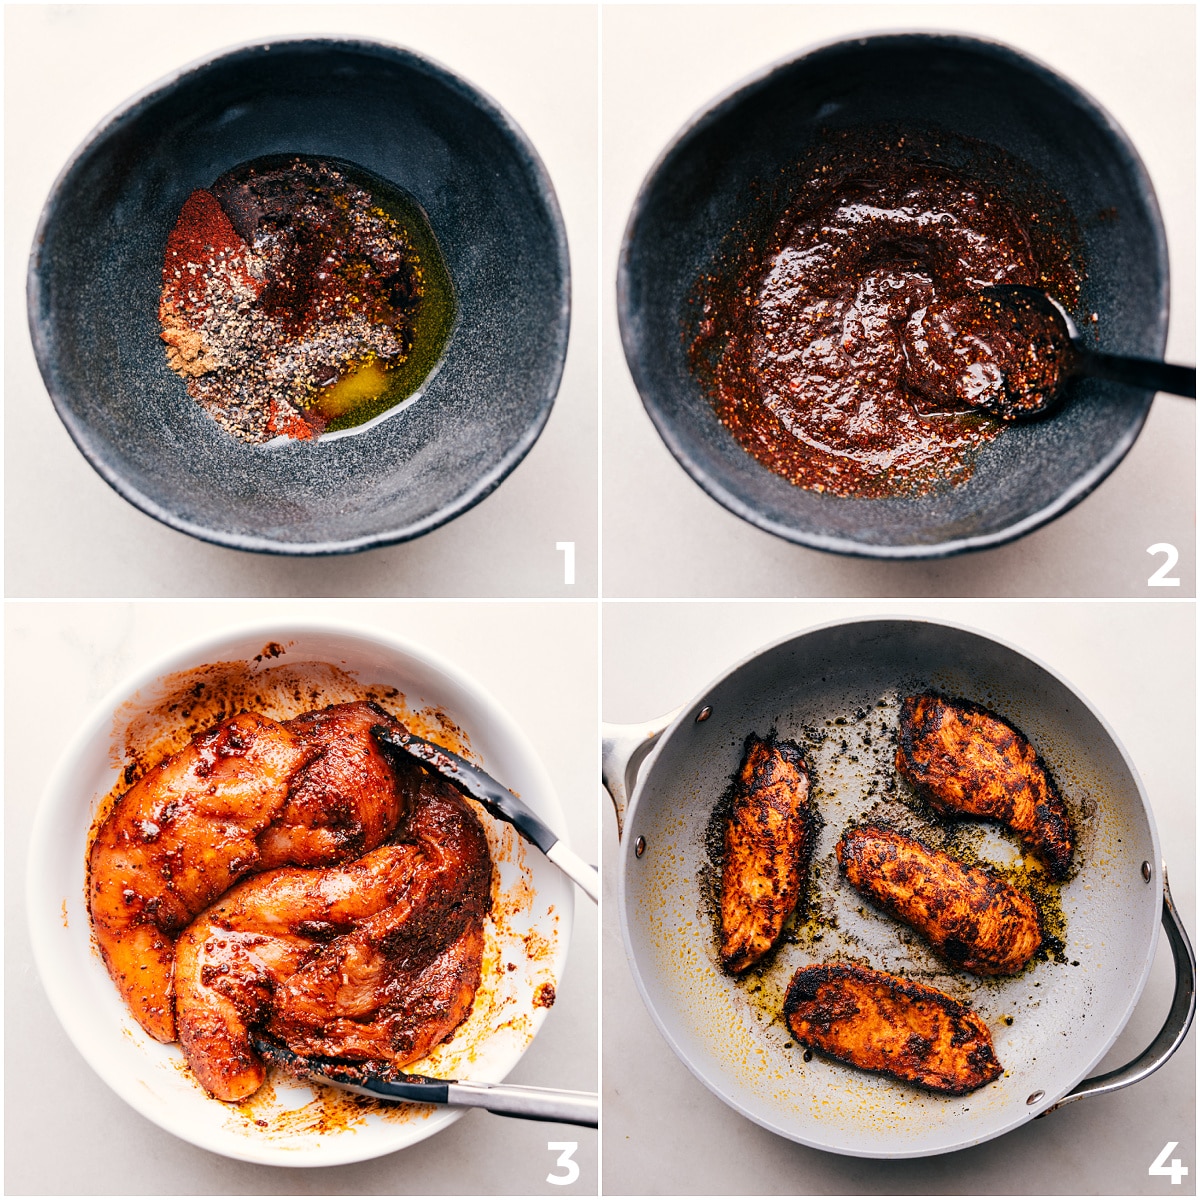 How to make blackened chicken: Begin by combining the seasonings, vinegar, and oil in a bowl. Next, thoroughly rub this mixture into the chicken. Finally, cook the chicken in a pot until it achieves a blackened crust.